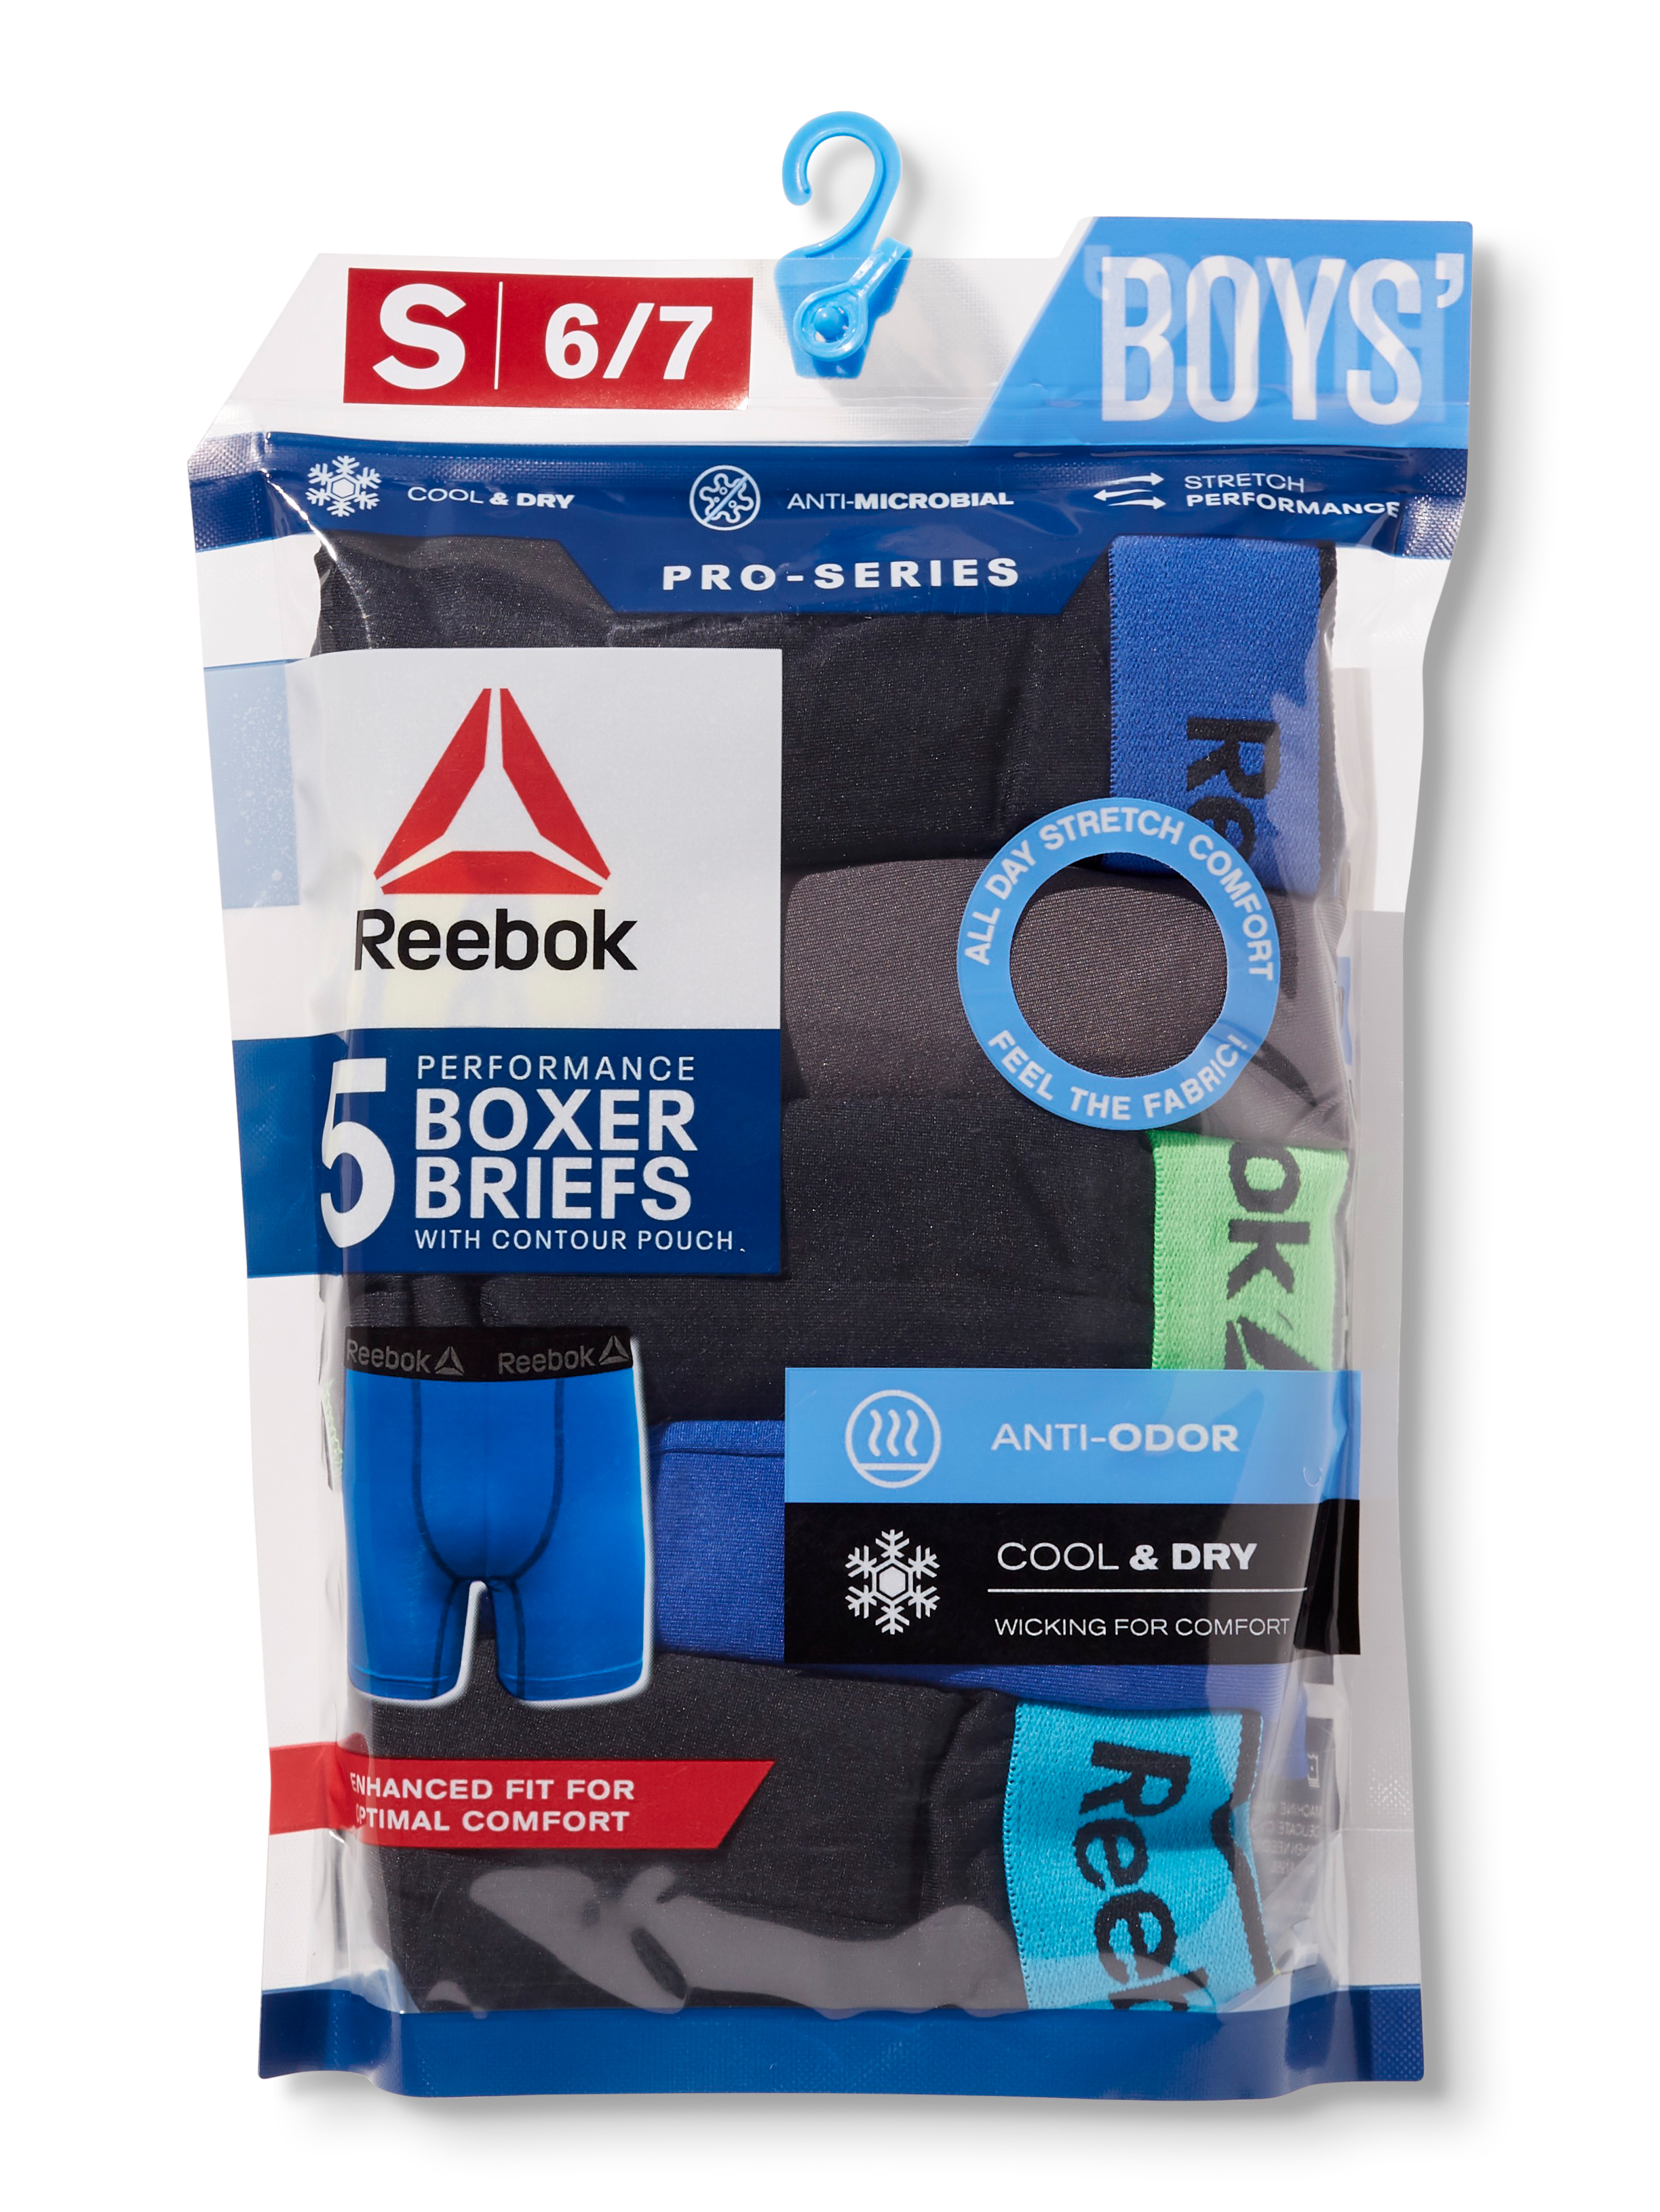 Reebok Boys' Performance Boxer Briefs, 5 Pack, Sizes S-XL - image 3 of 6